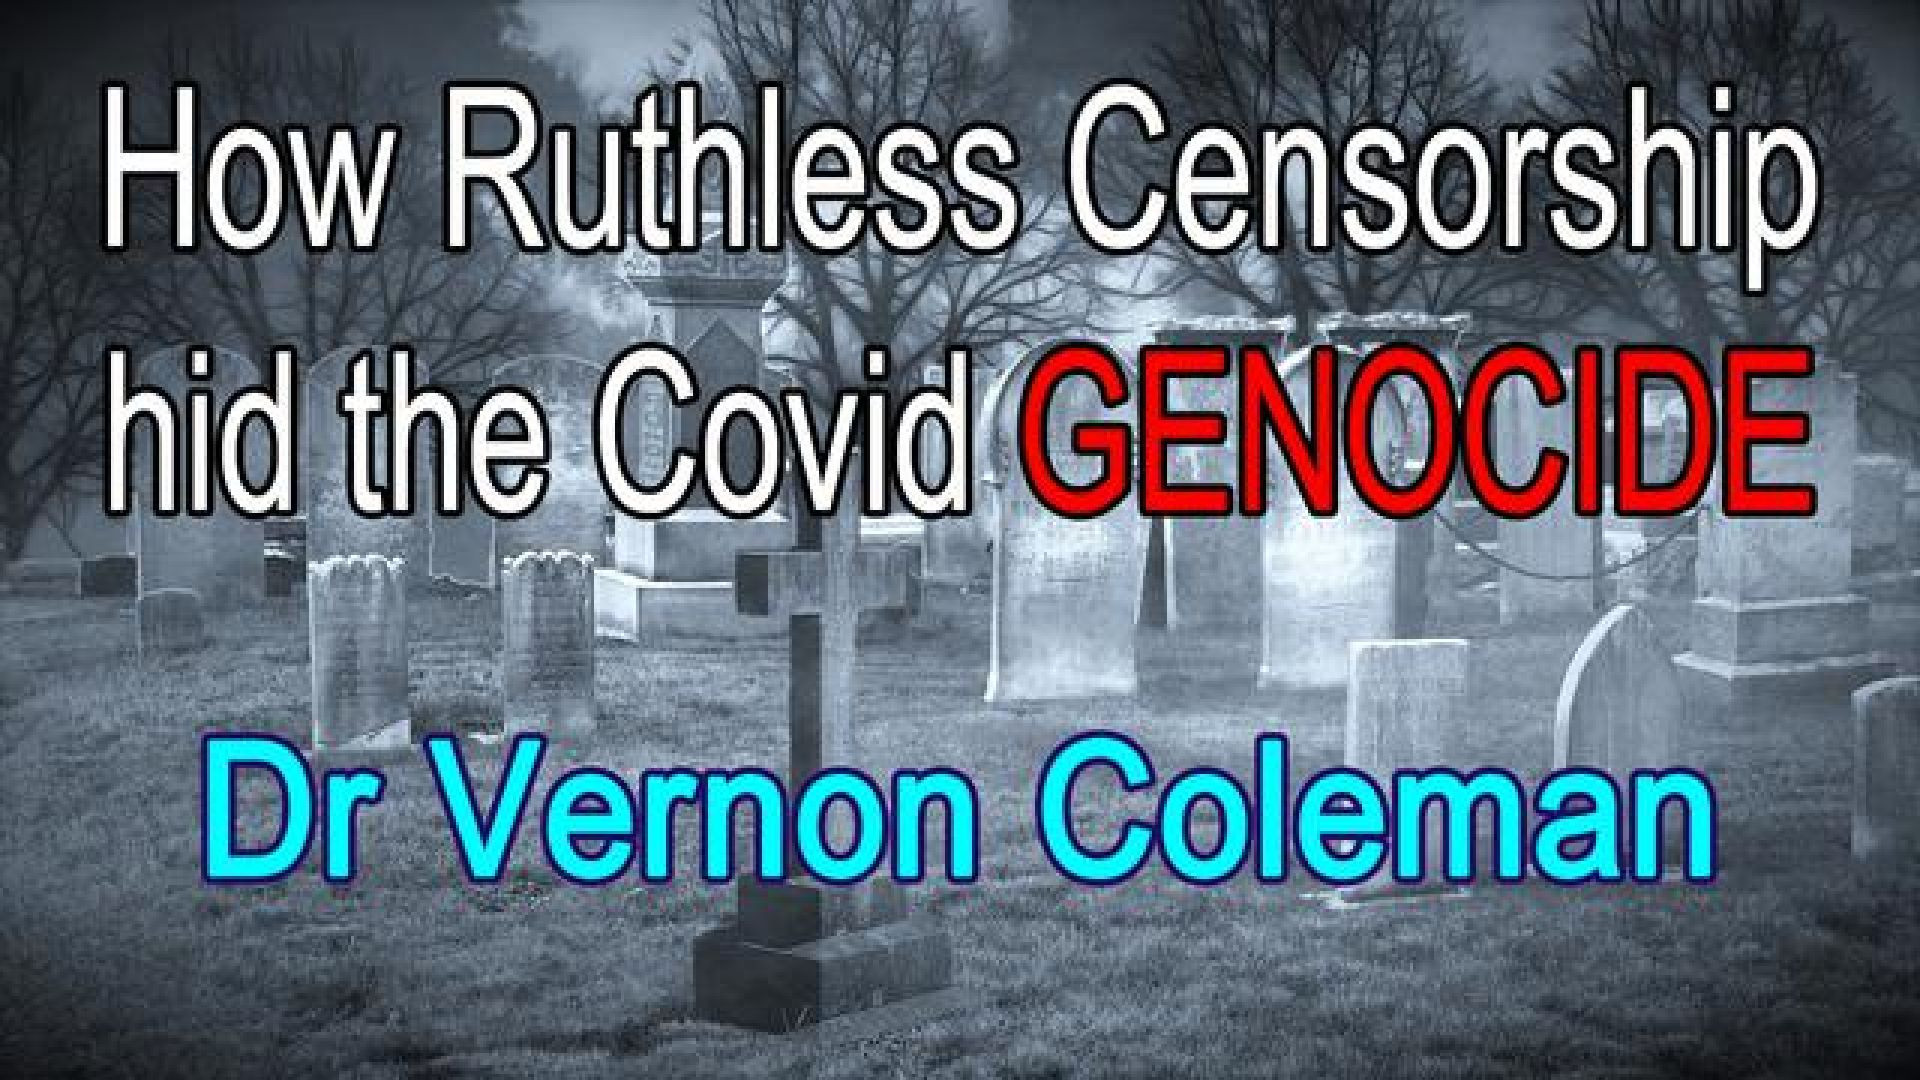 HOW RUTHLESS CENSORSHIP HID THE COVID GENOCIDE